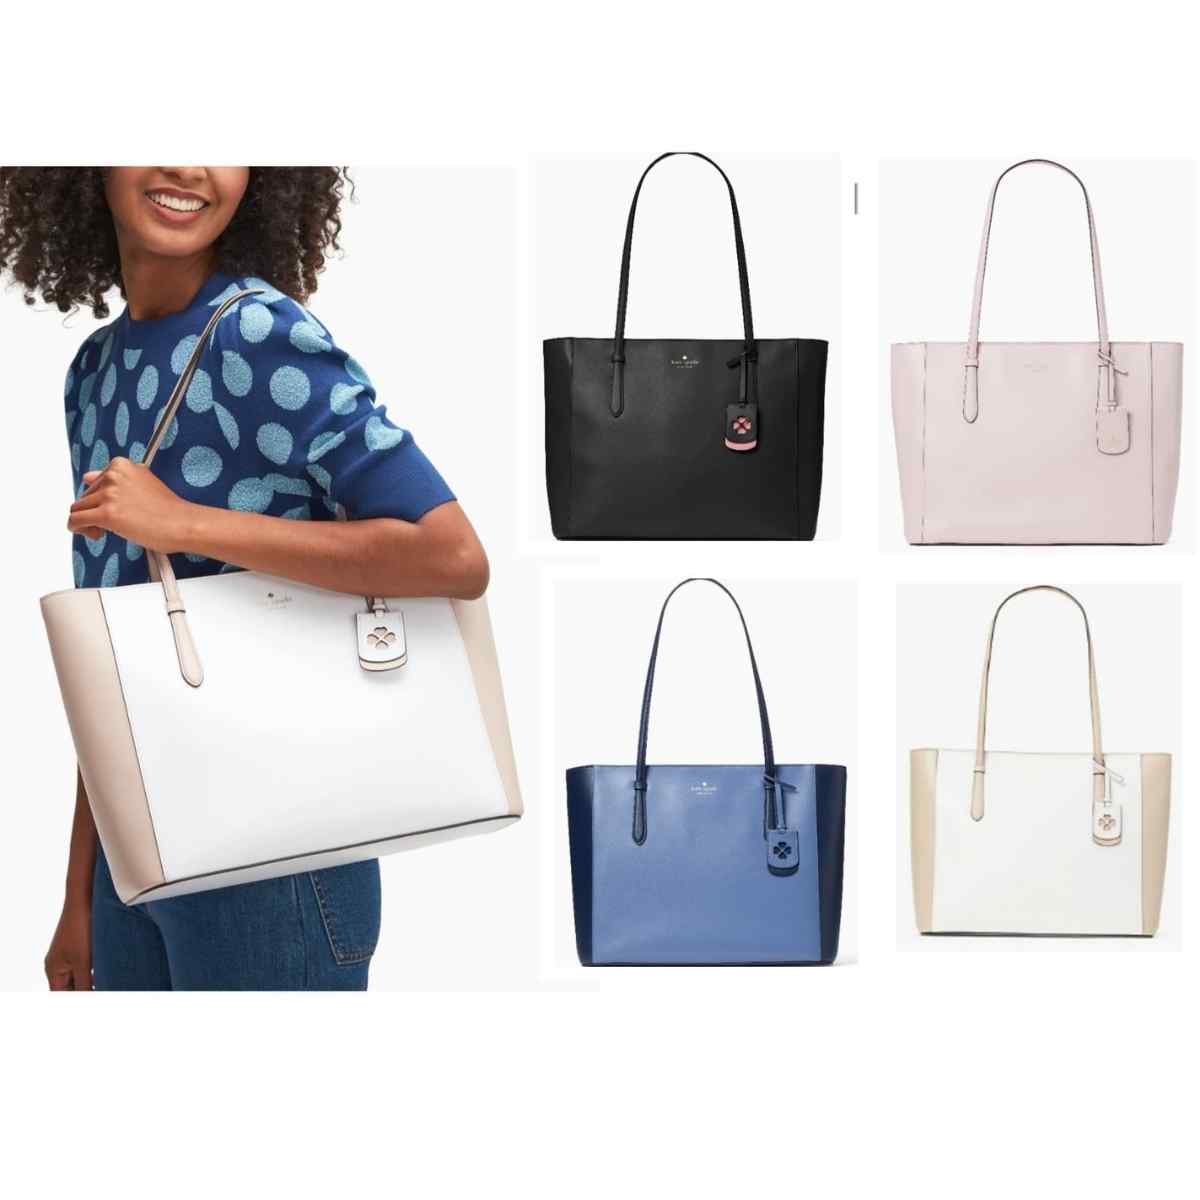 Kate Spade schuyler medium tote on sale for $75 (Retails at $329 ...